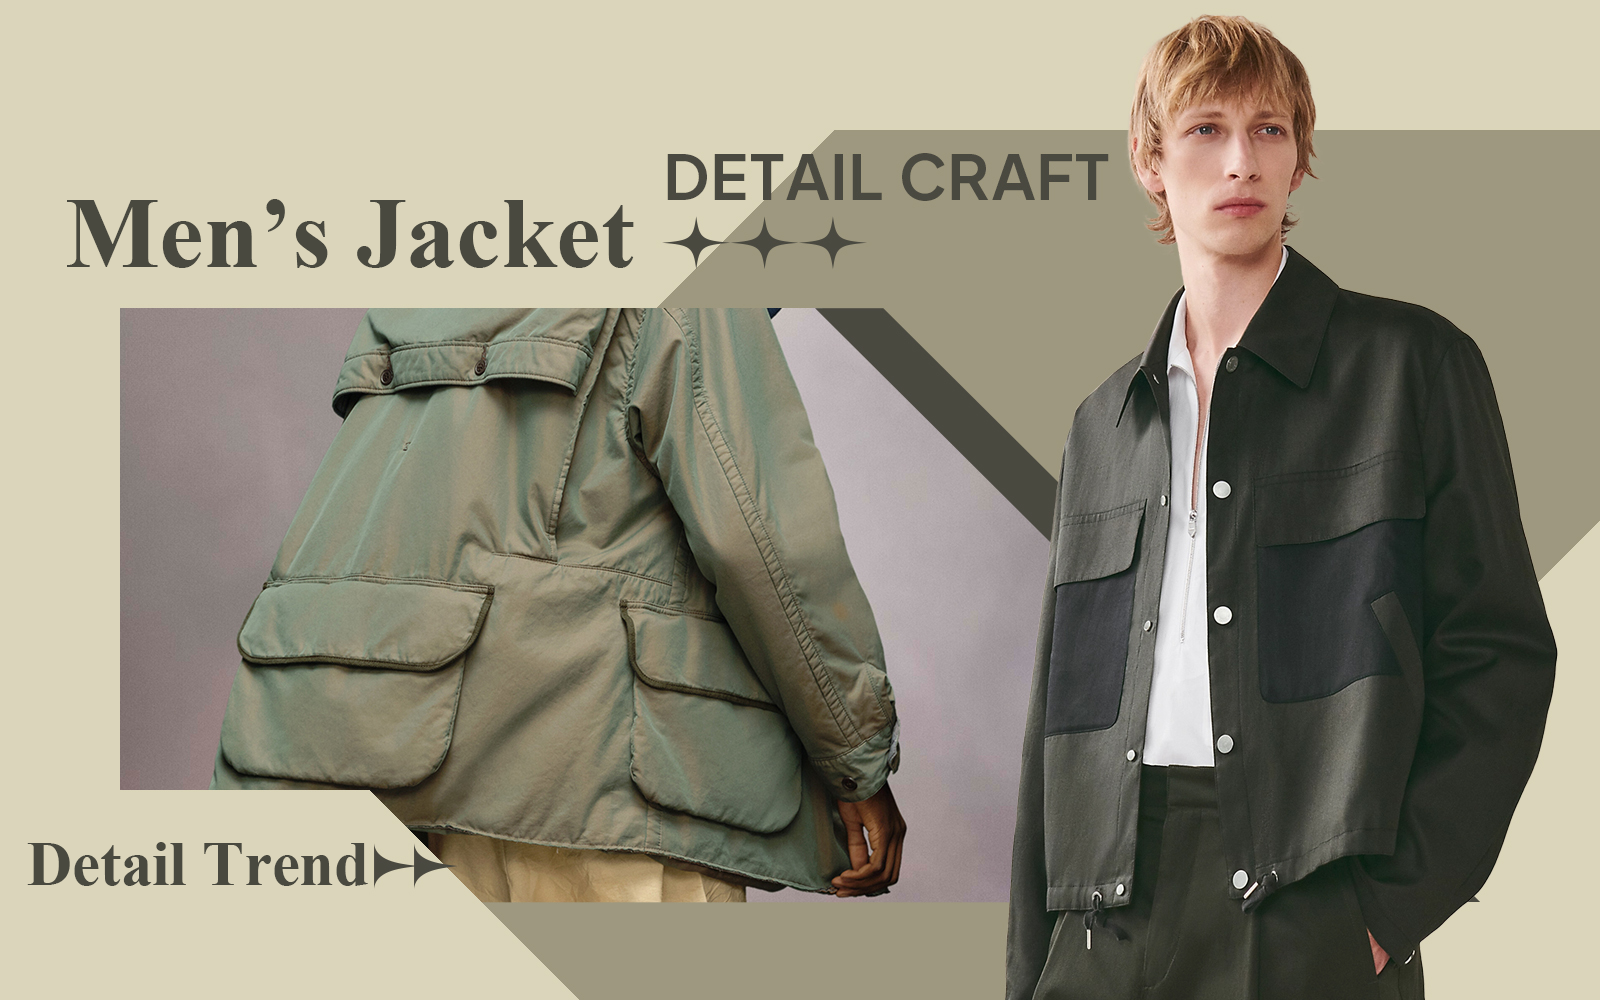 The Detail & Craft Trend for Men's Jacket